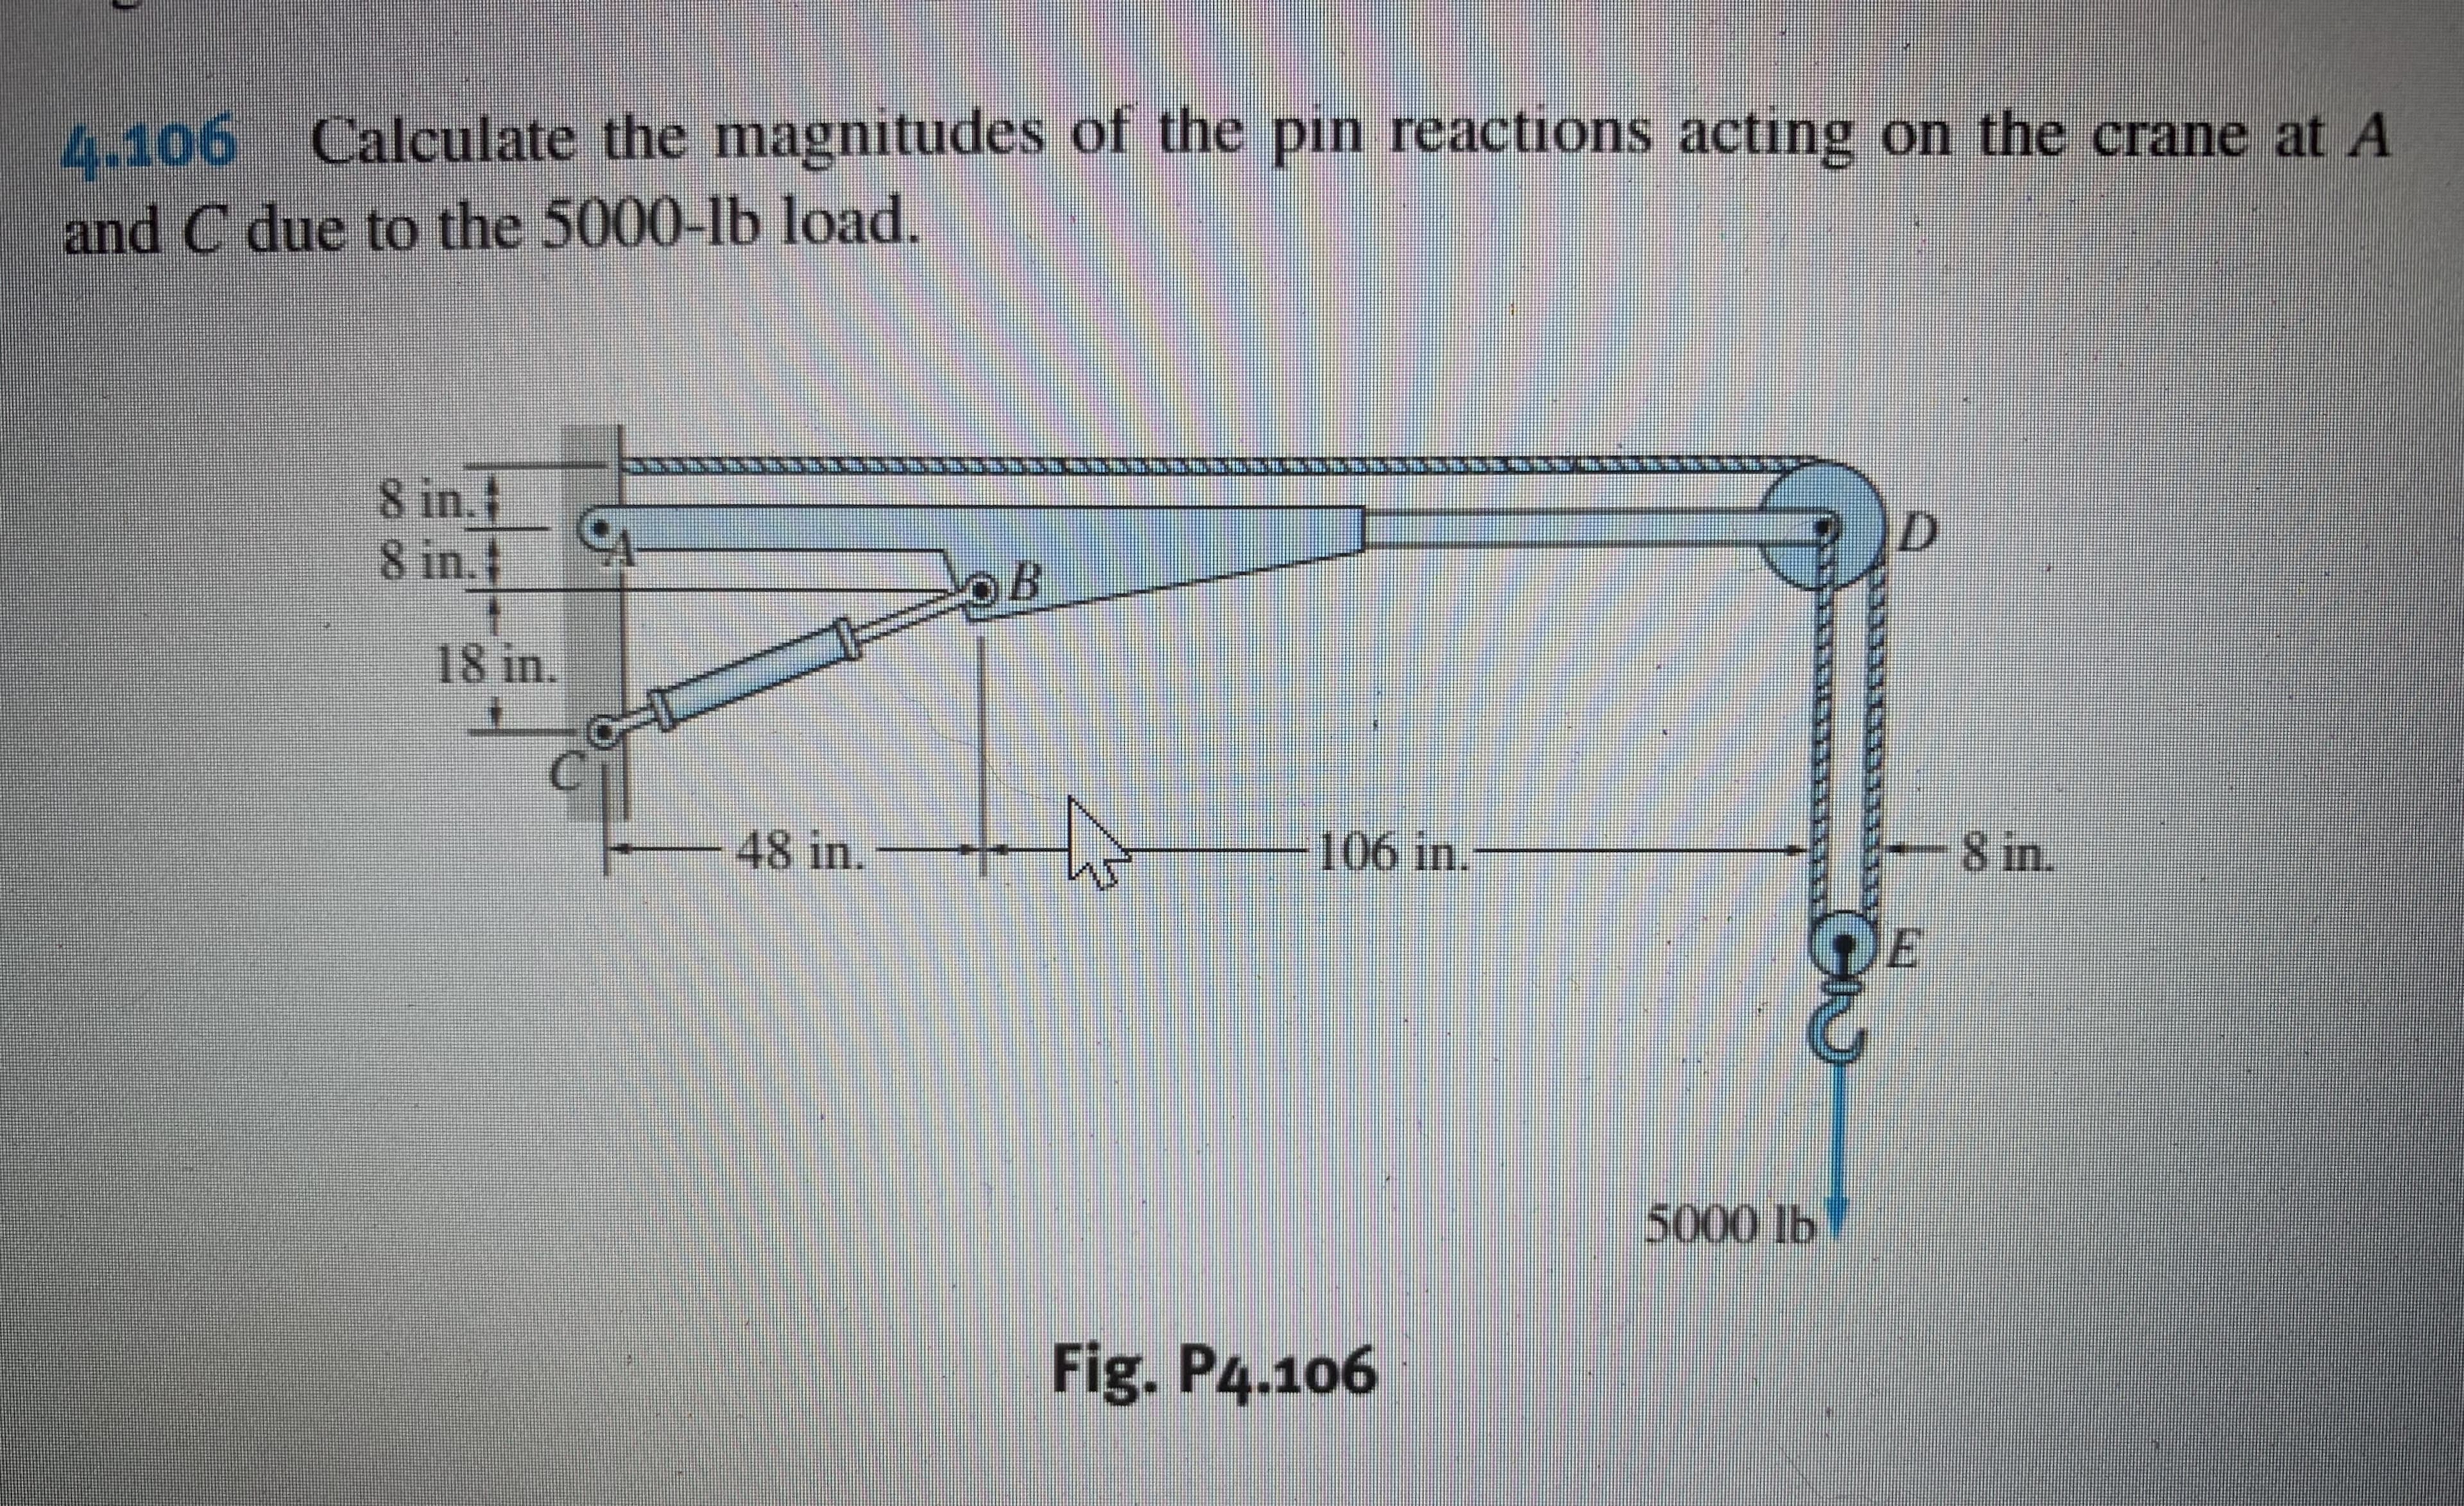 4.106 Calculate the magnitudes of the pin reactions acting on the crane at A
and C due to the 5000-lb load.
8 in.t
8 in.t
18 in.
48 in.
-106 in.
-8 in.
DE
5000lb
Fig. P4.106
